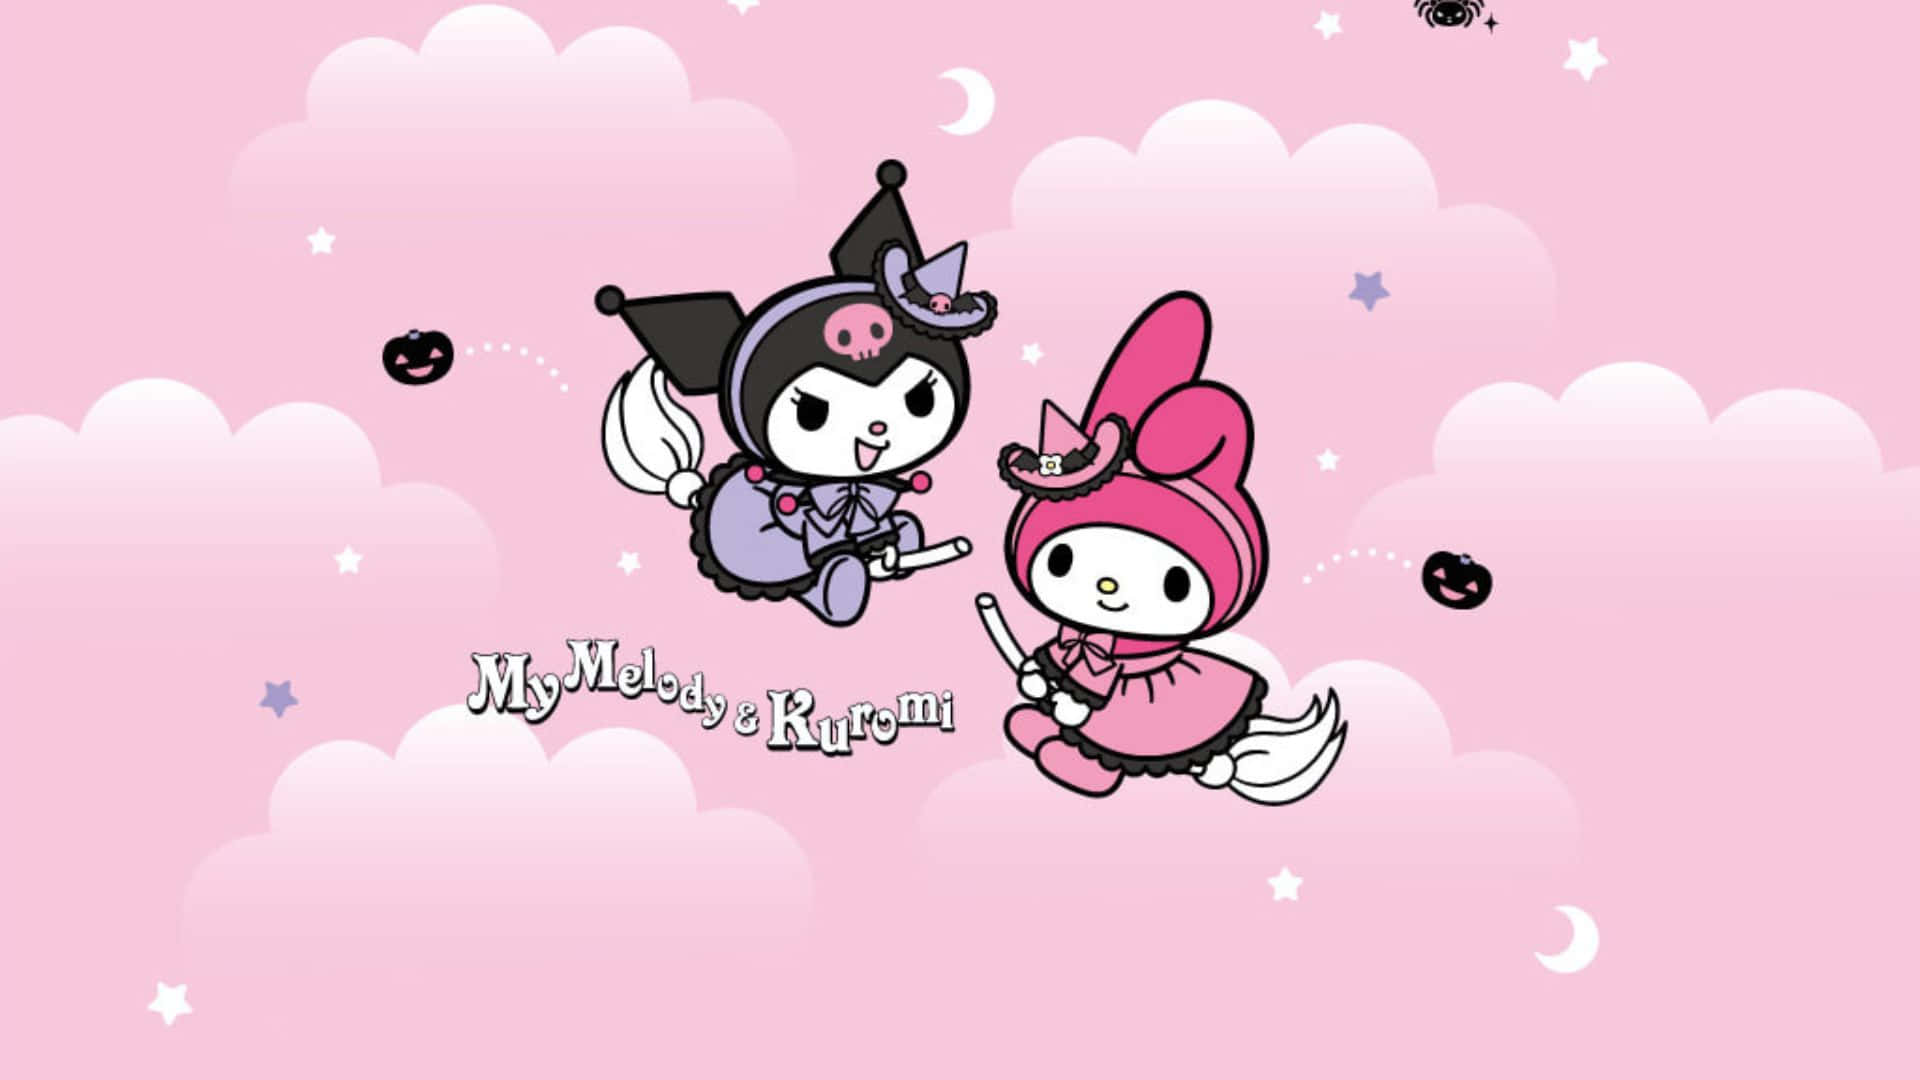 100+] Kuromi And My Melody Wallpapers | Wallpapers.com